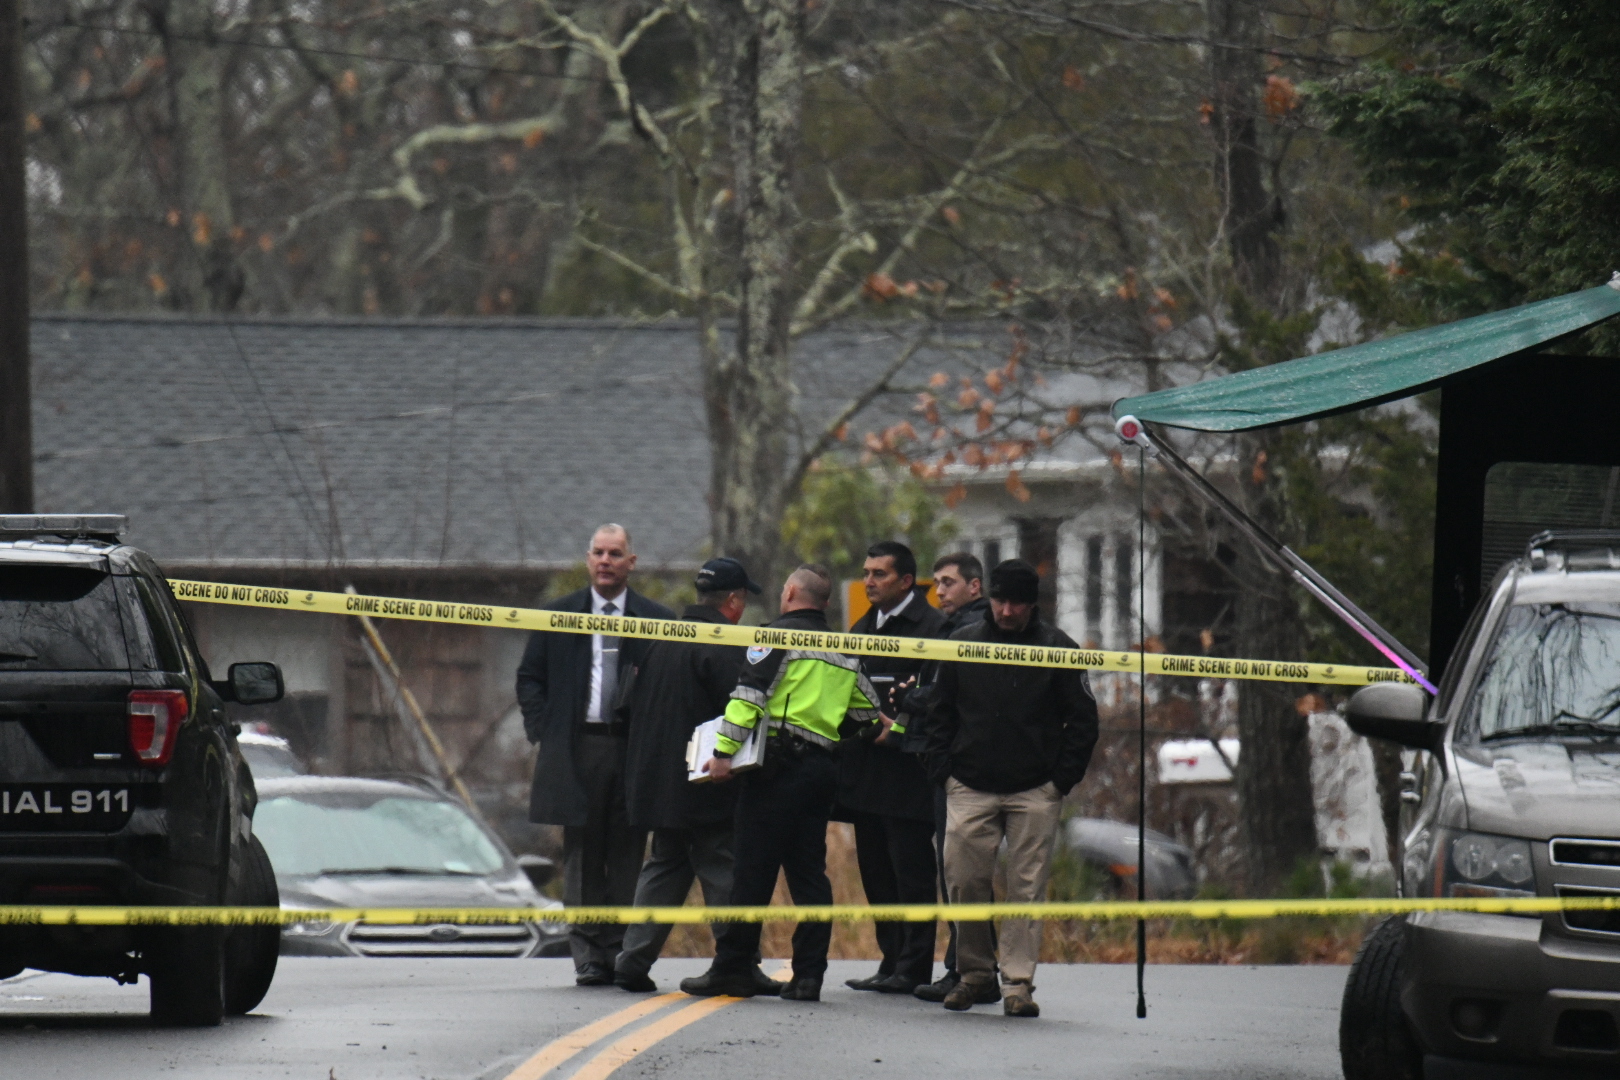 Suffolk County and Southampton Town both had mobile command center vehicles set up at the scene of the Christmas morning murder.